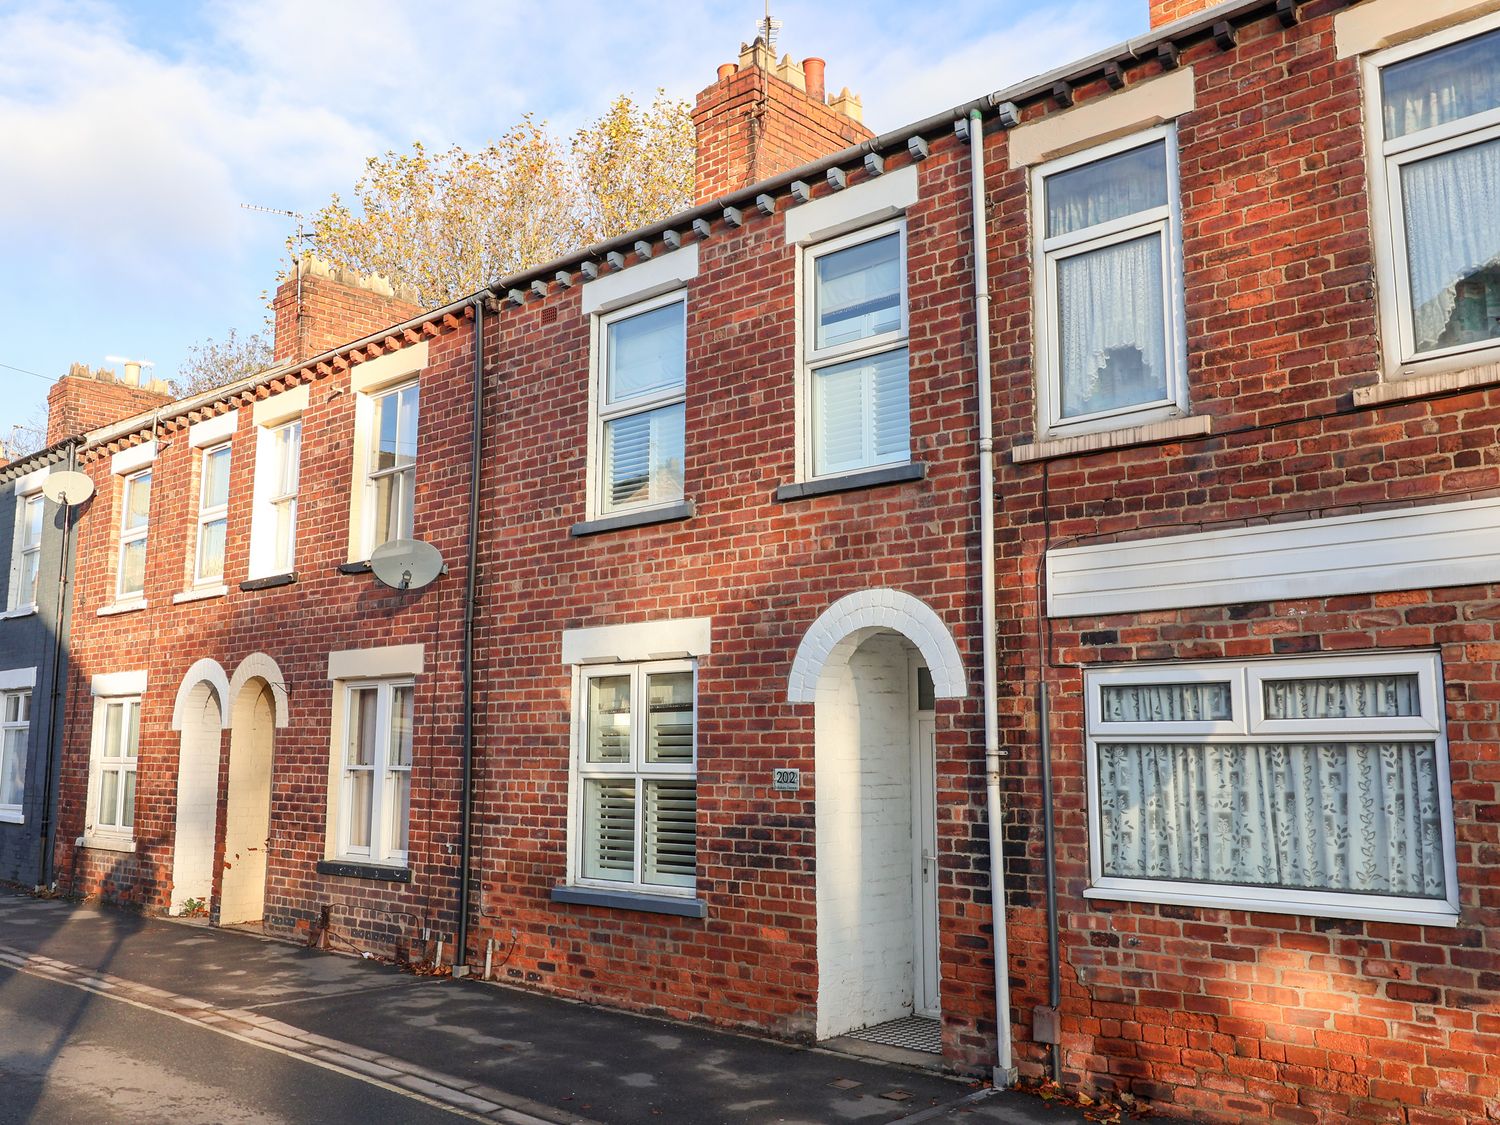 202 Salisbury Terrace - North Yorkshire (incl. Whitby) - 1051138 - photo 1